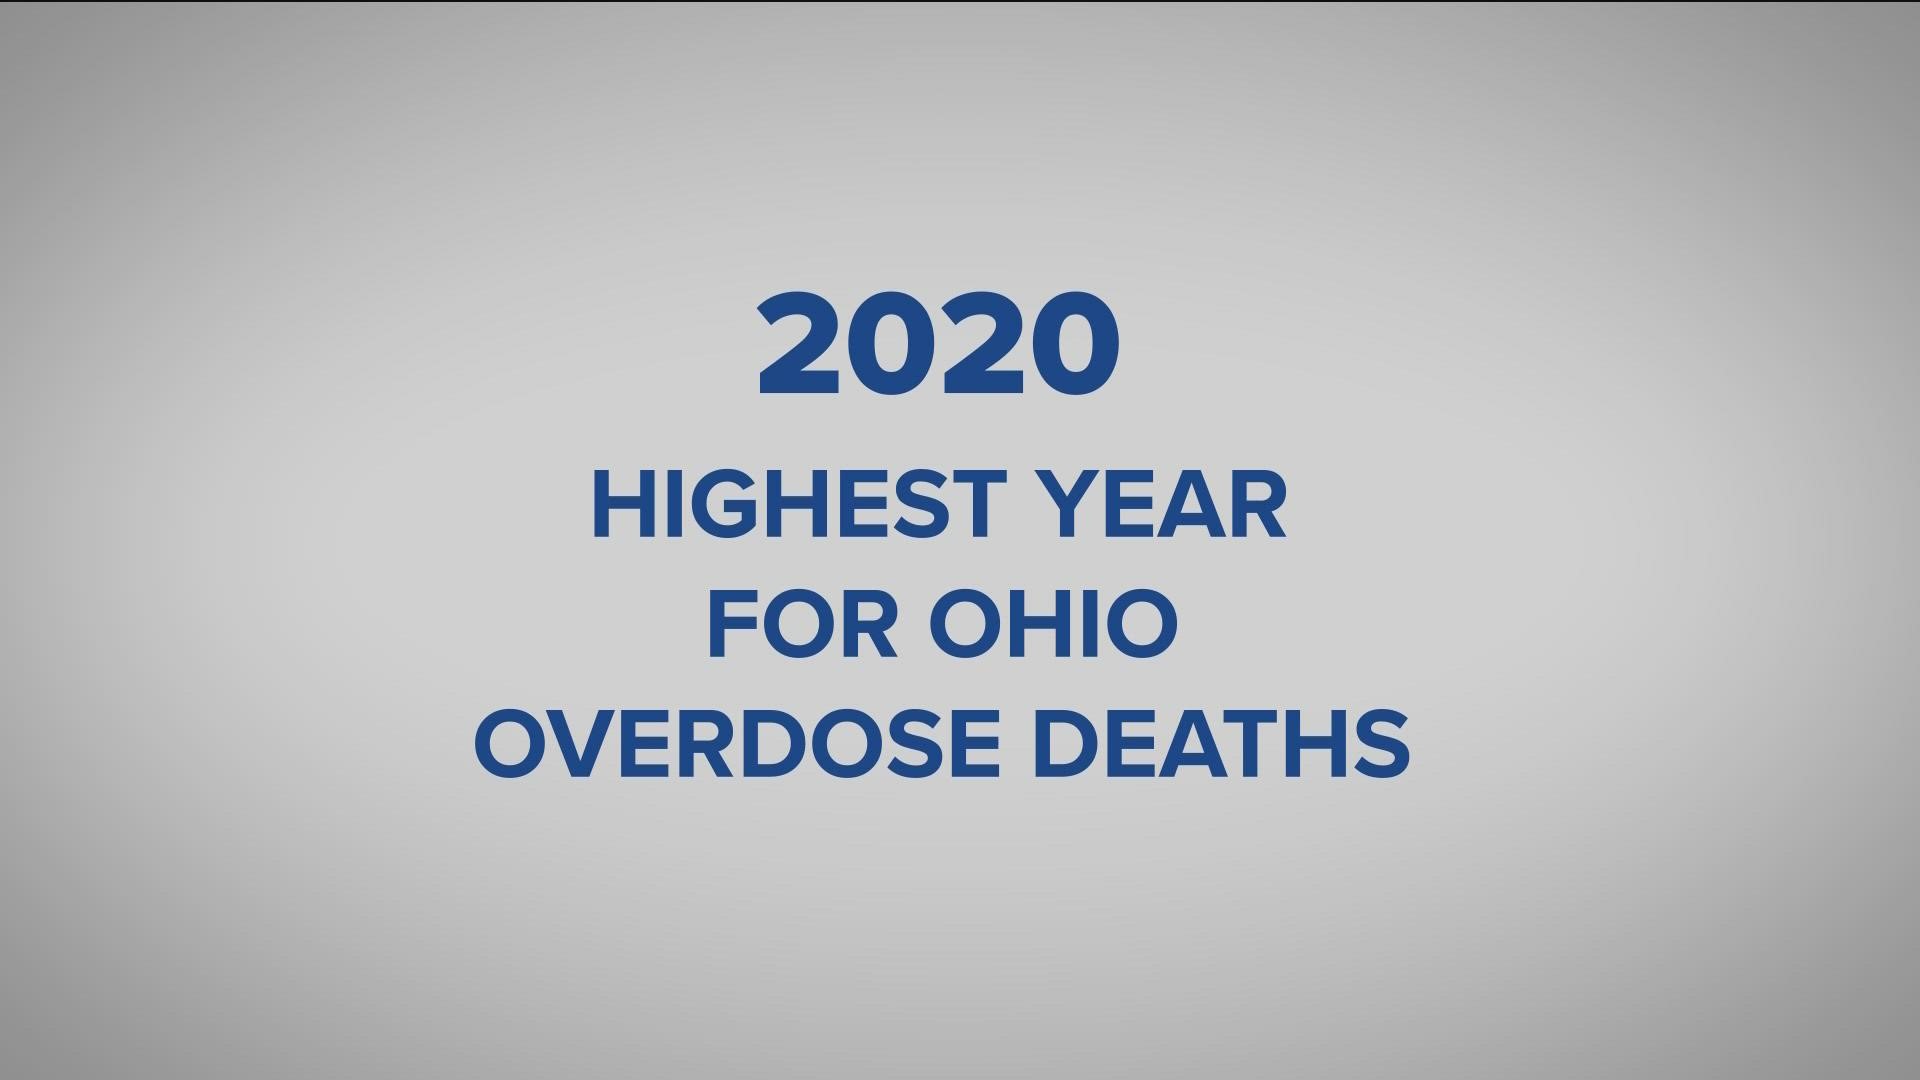 According to the CDC, 44 people die every day from overdoses involving prescription opioids.